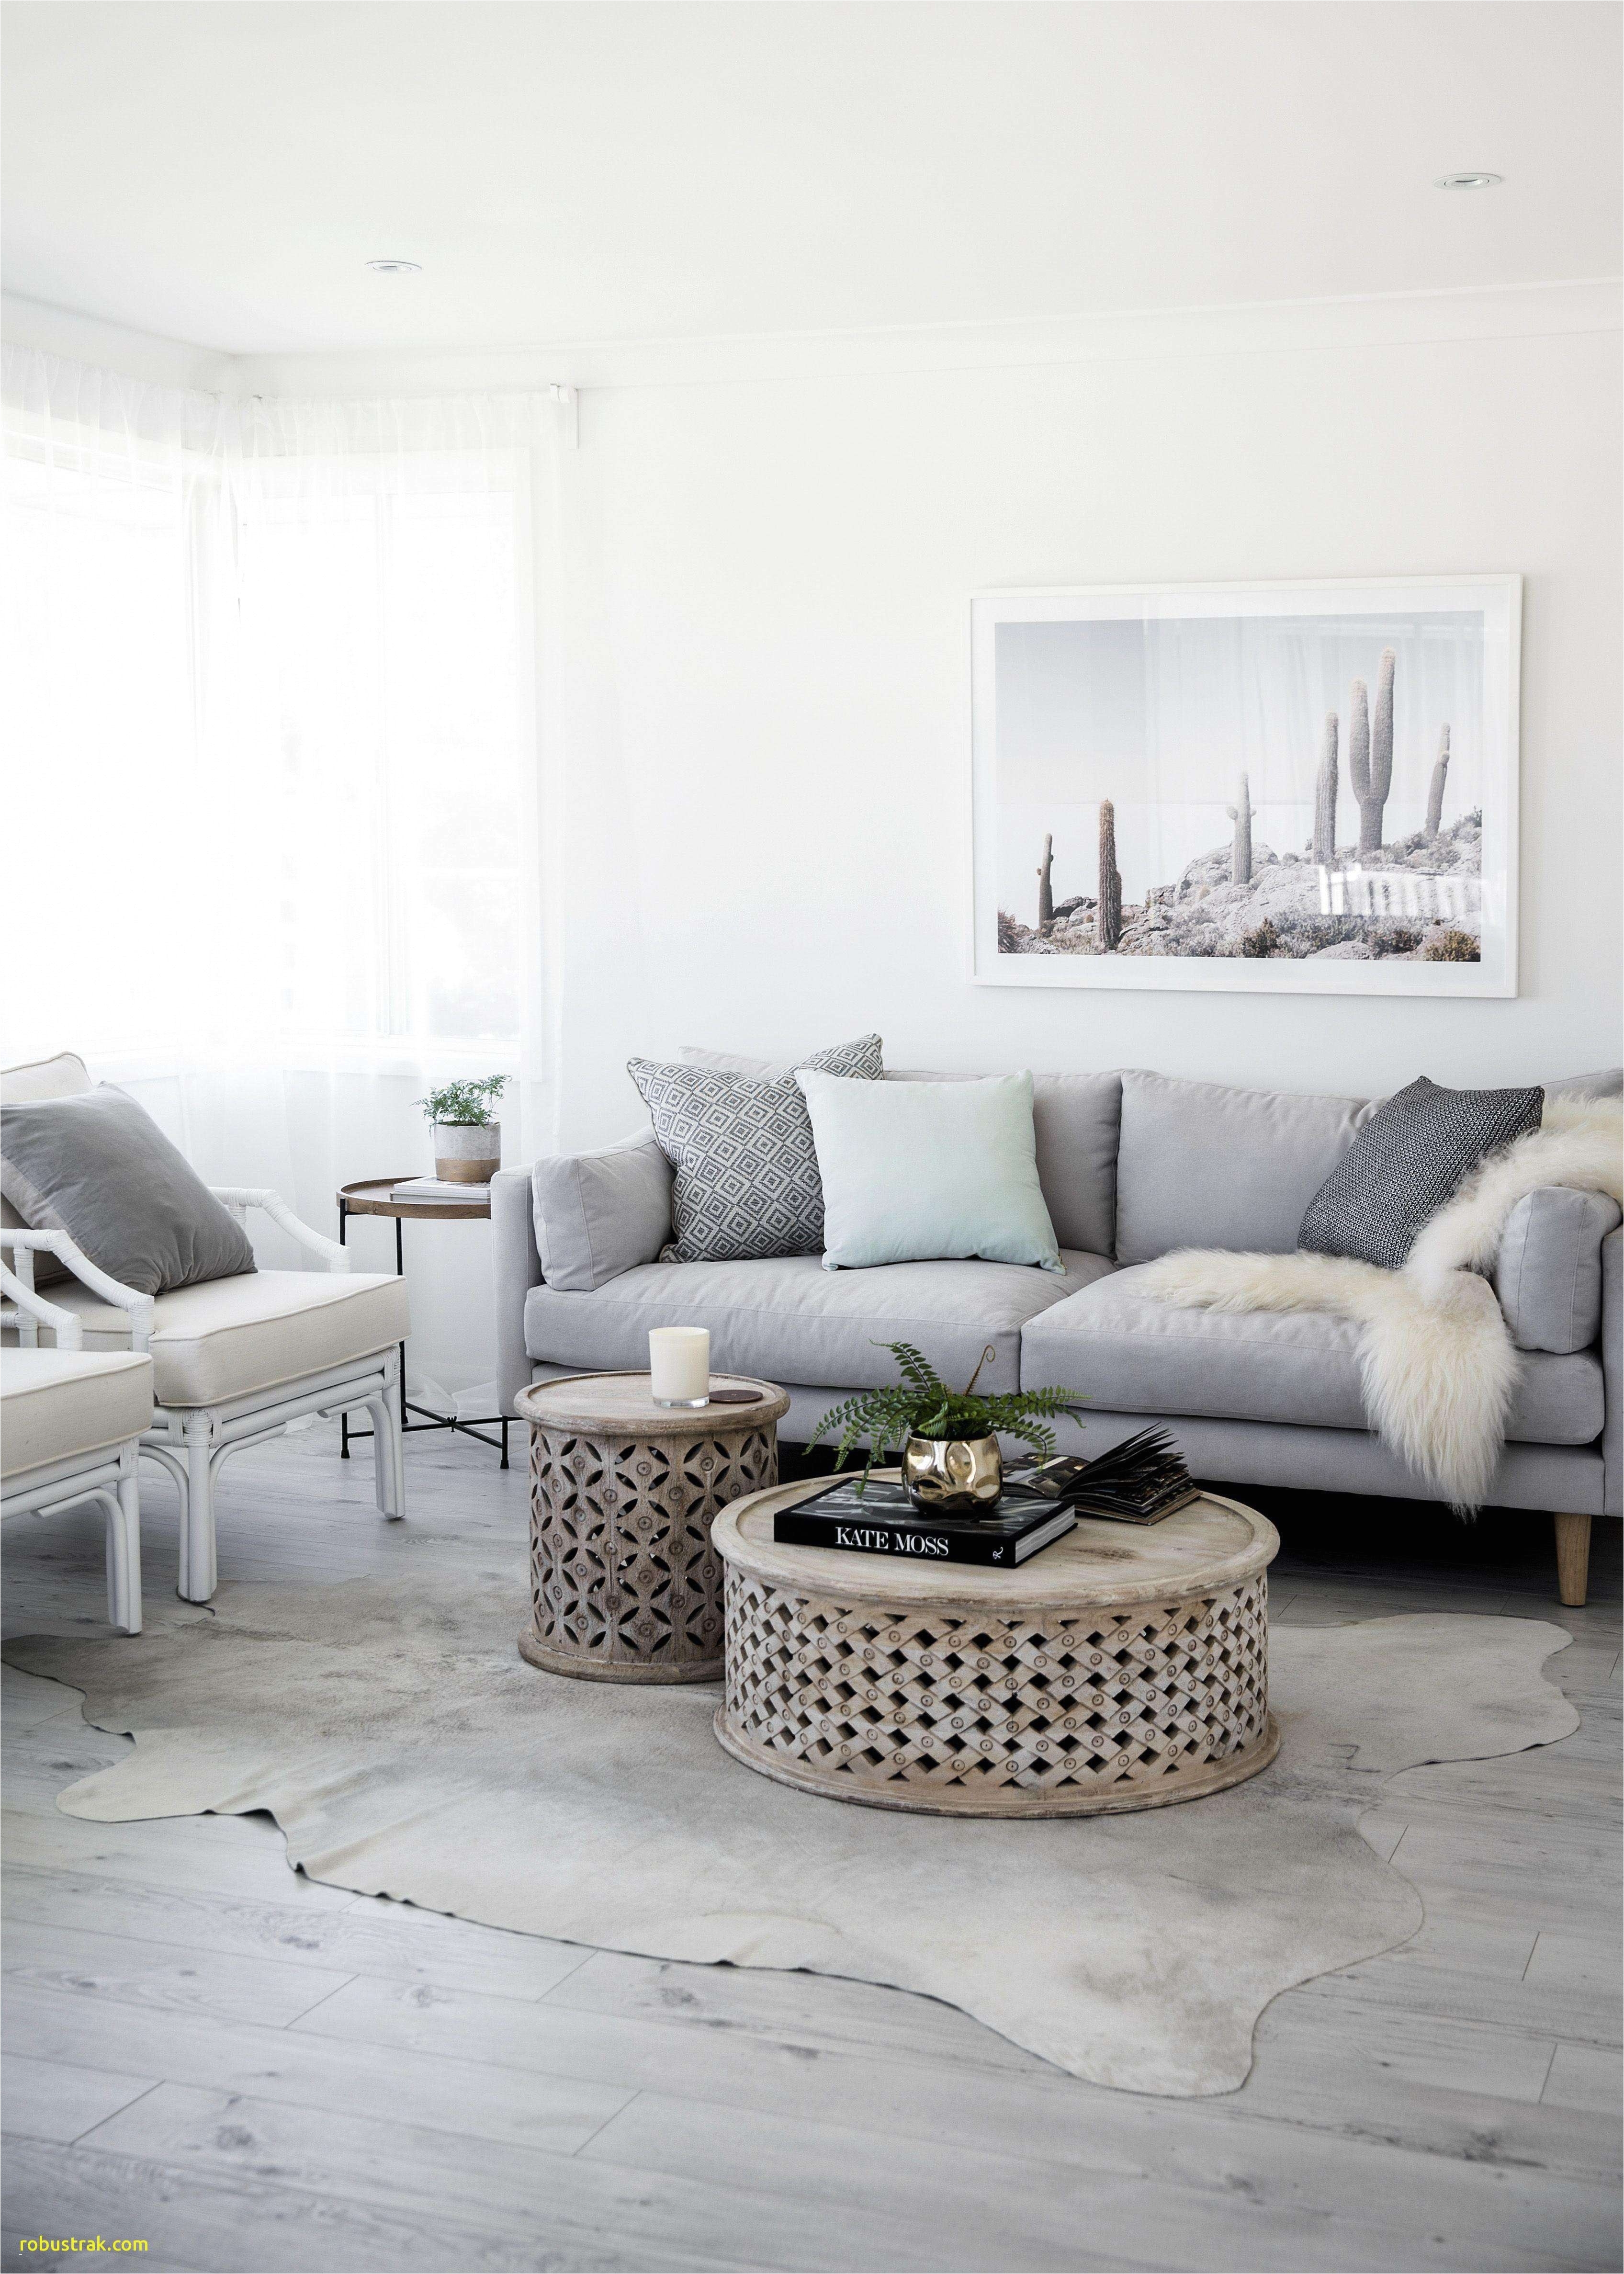 Living Room Ideas with Gray sofa Inspirational Furniture Dark Grey Couch Inspirational Wicker Outdoor sofa 0d